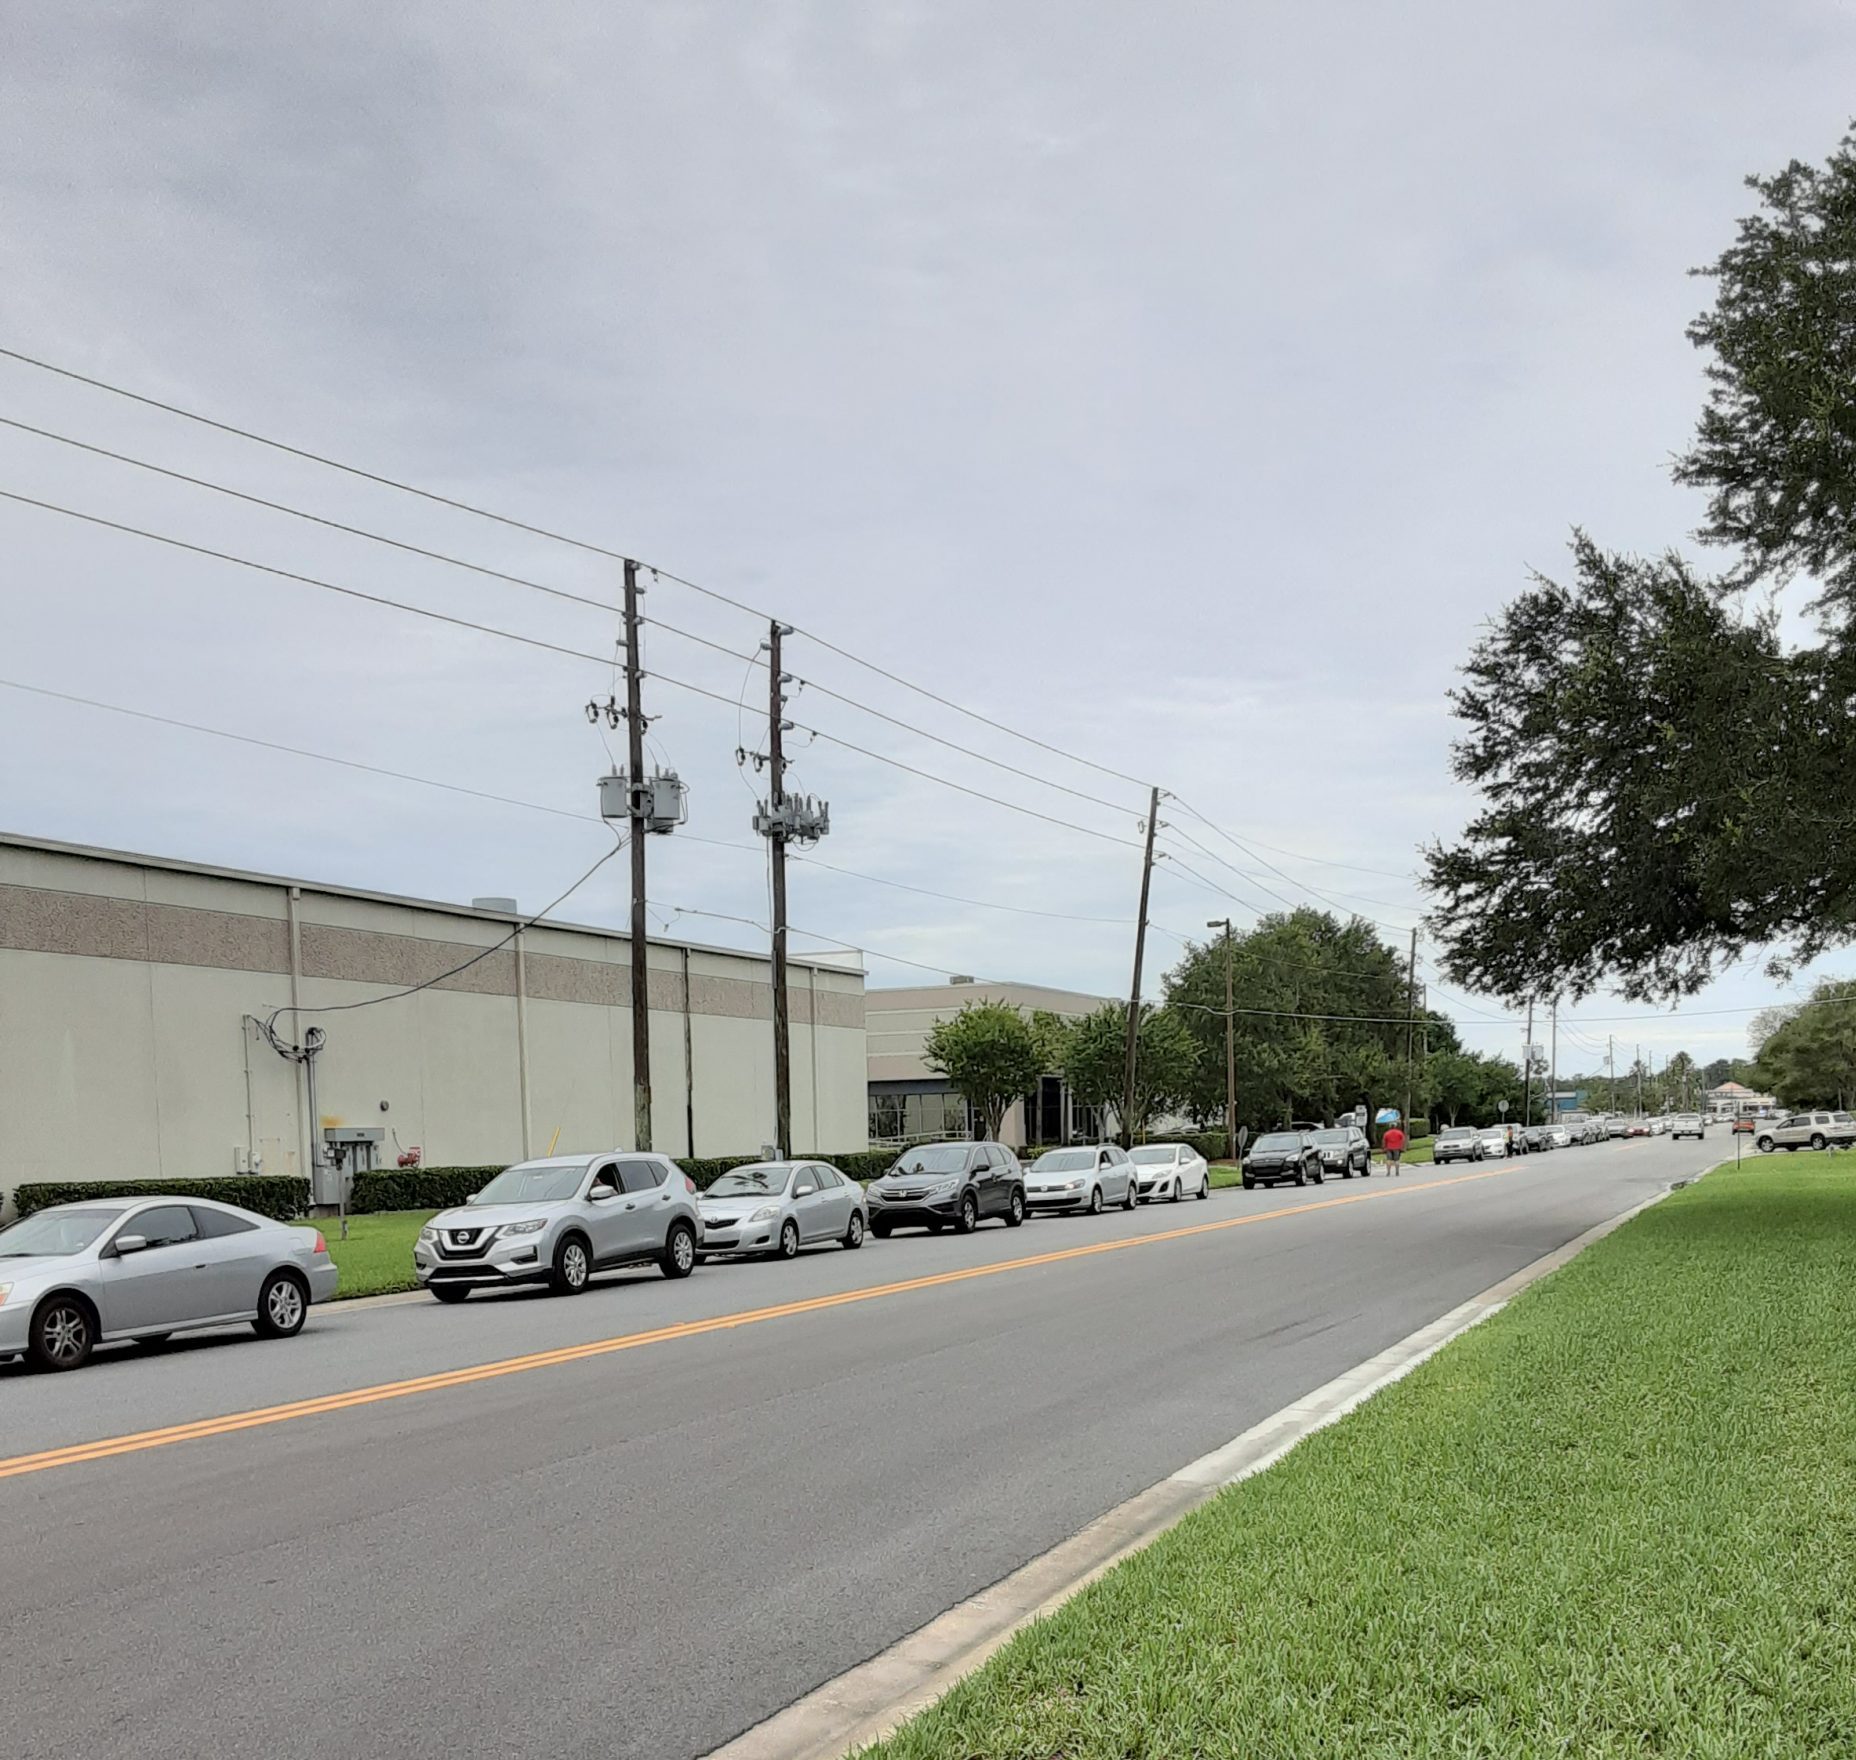 cars lined up to receive a box of food in Orlando, Florida